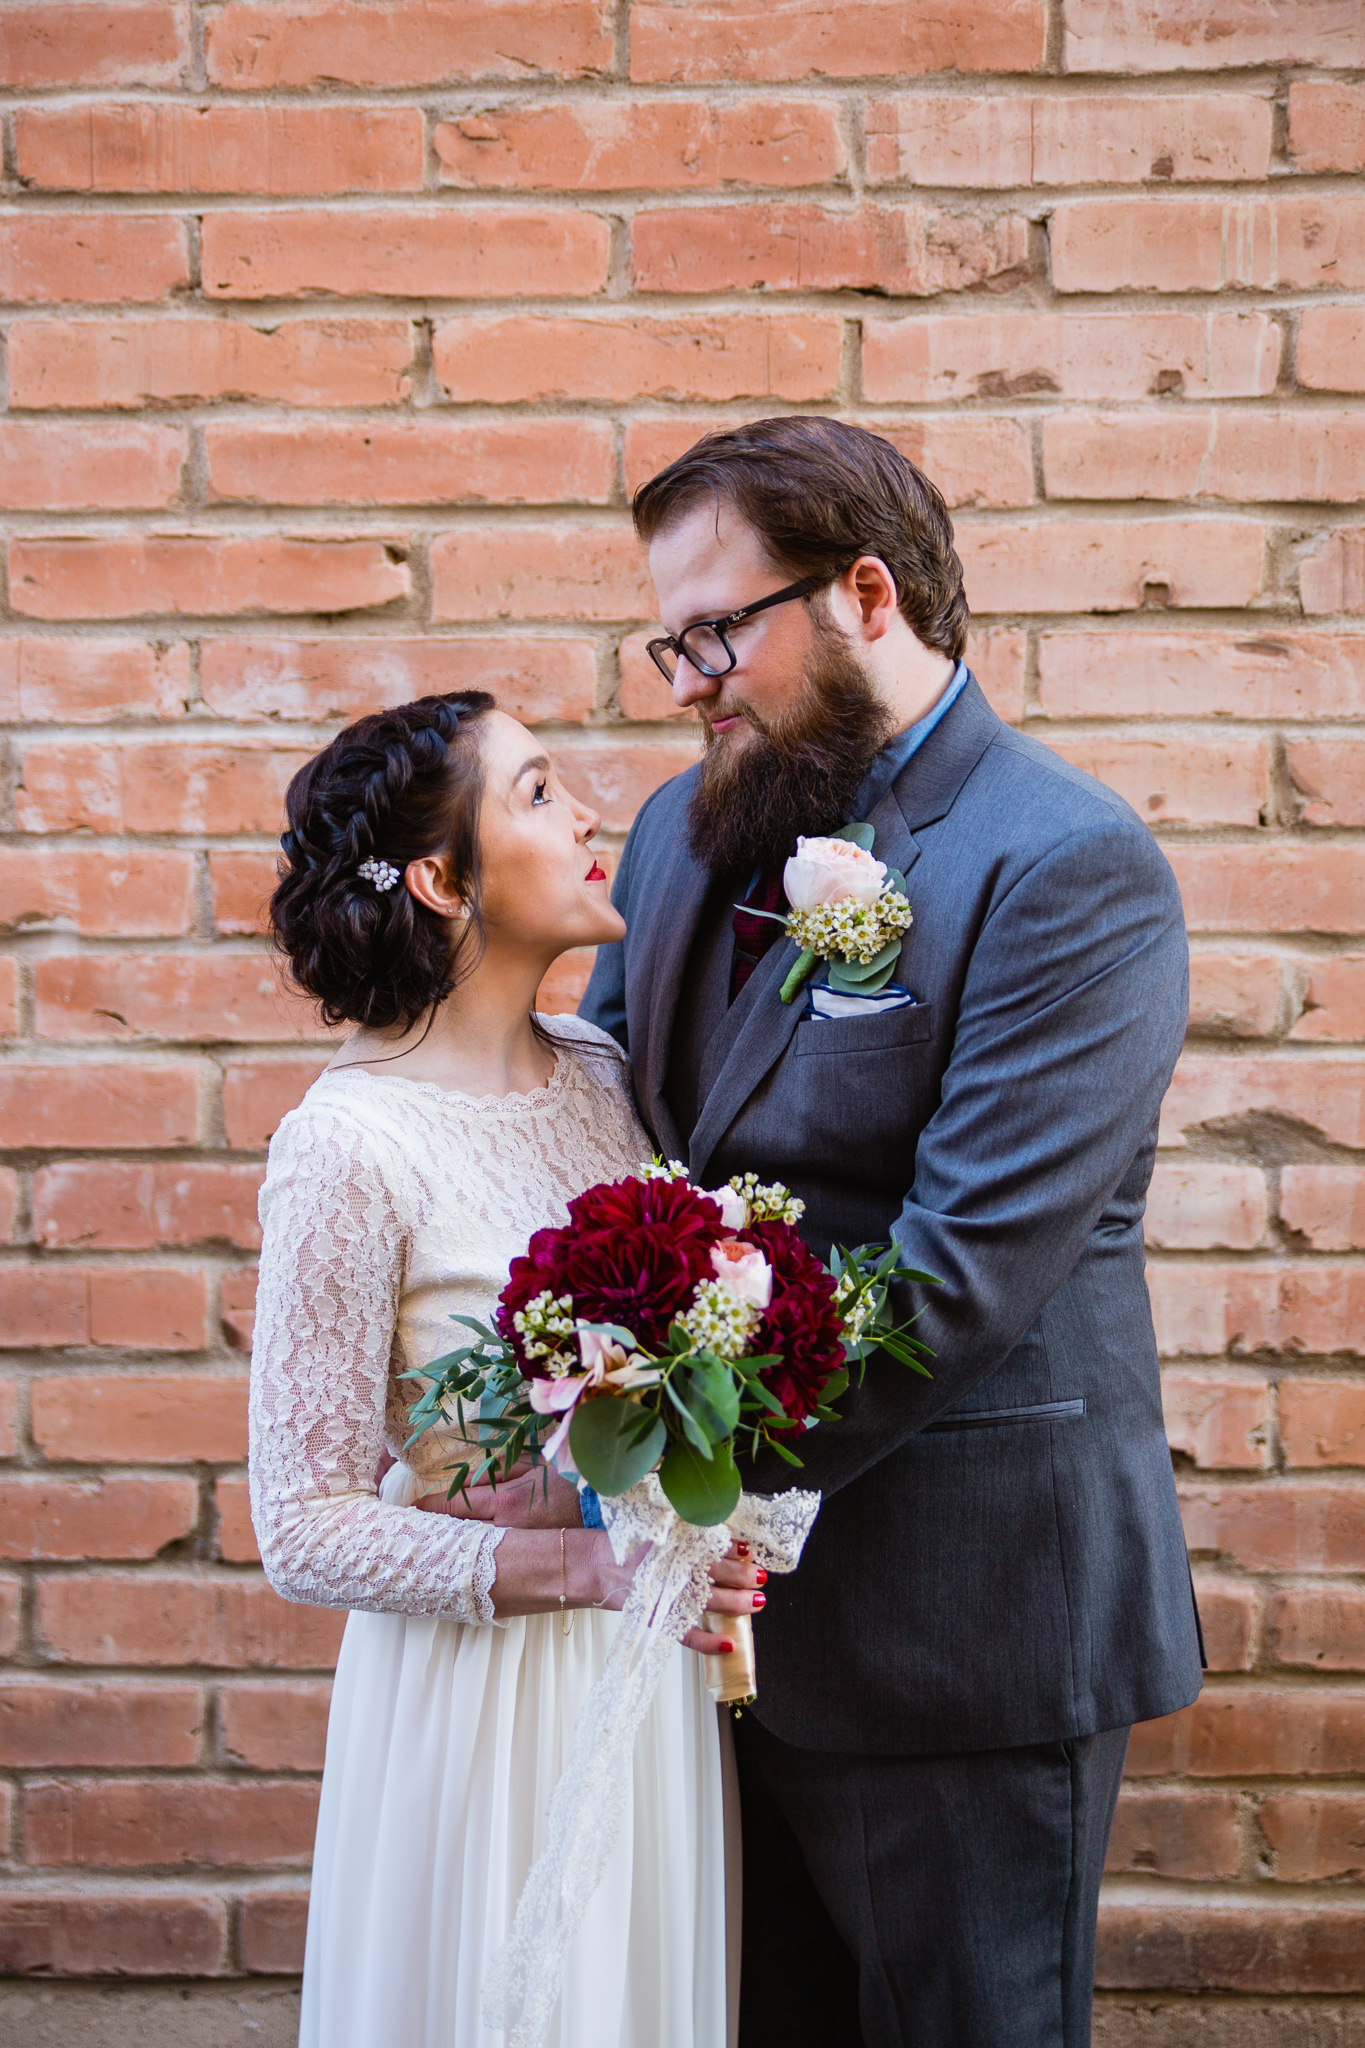 Vintage inspired bride and groom in front of brick wall from a maroon and cream wedding in downtown Phoenix.